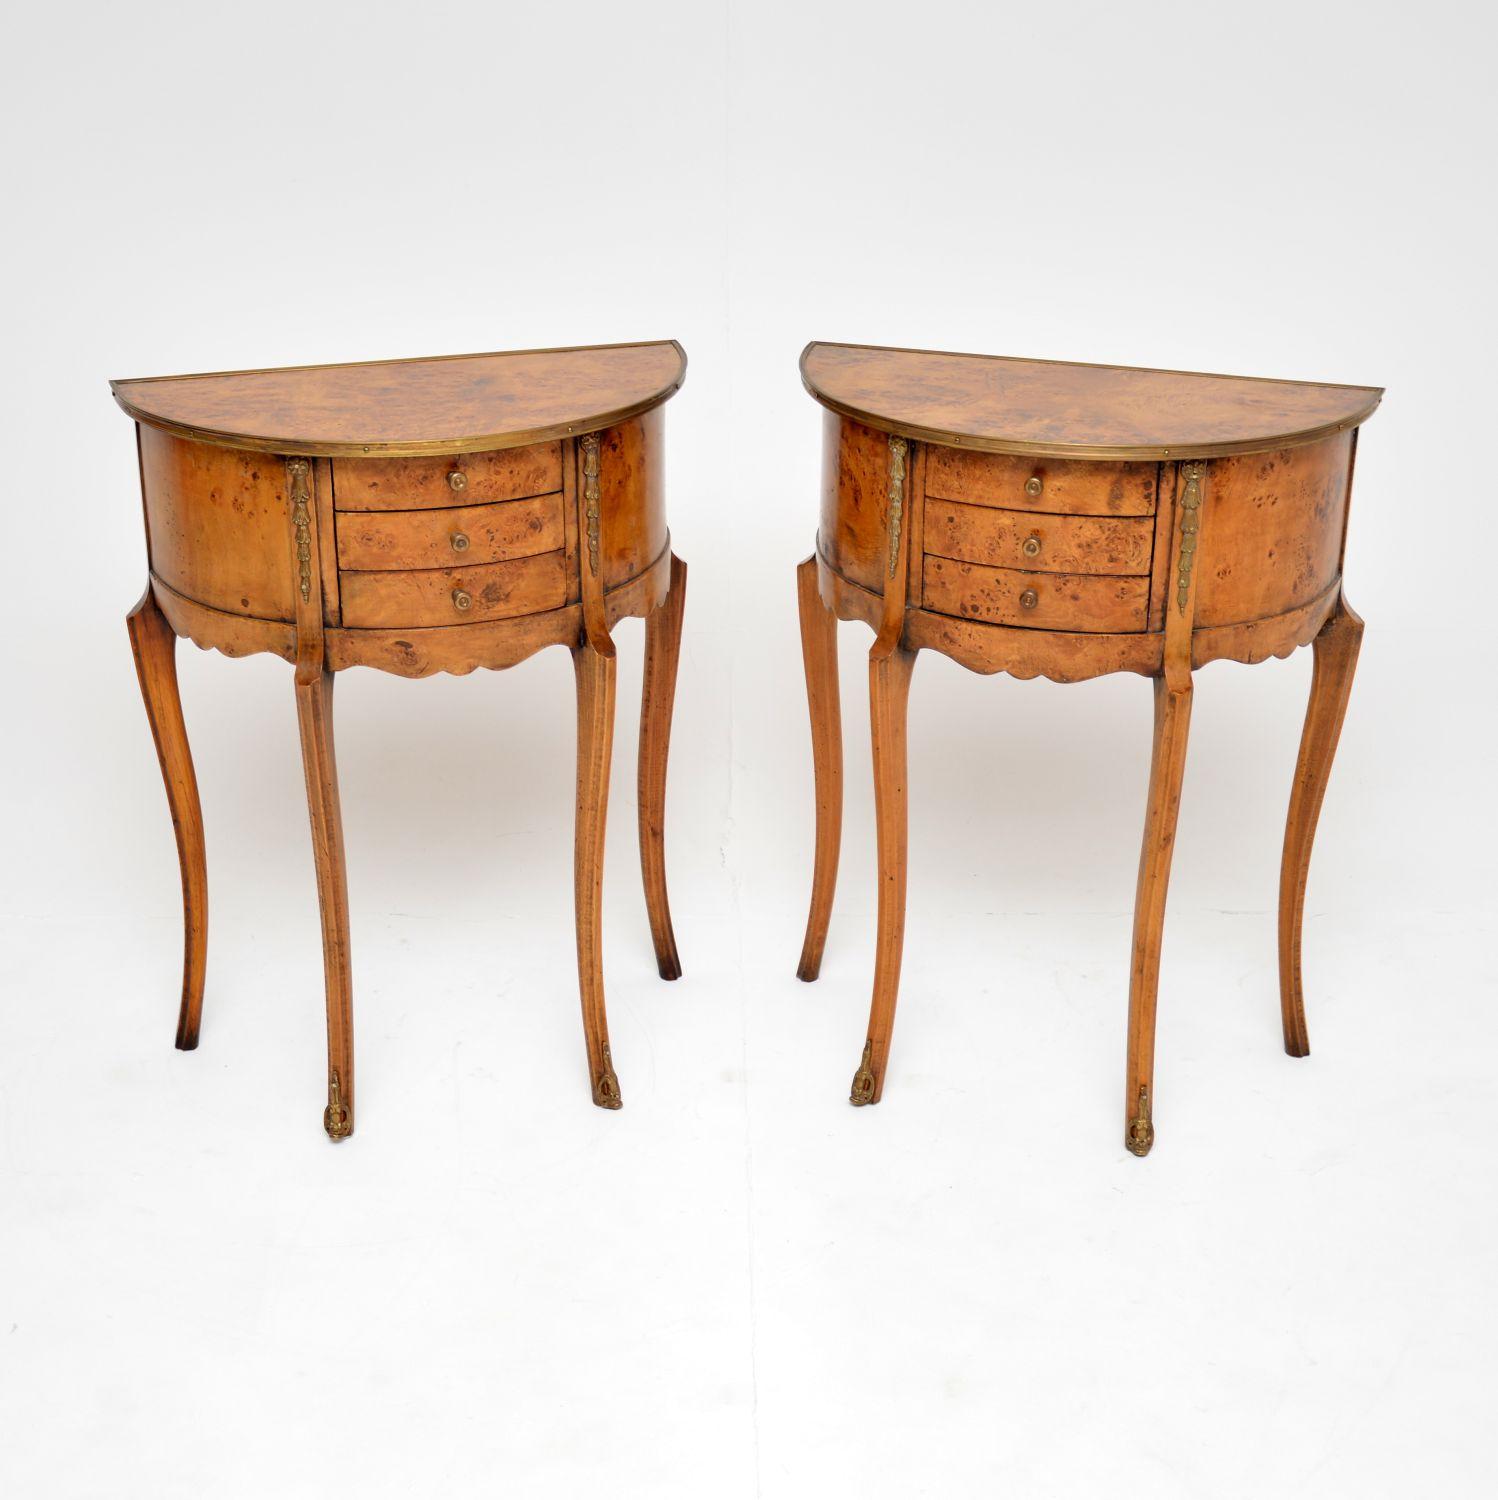 A stunning pair of demi-lune antique French side tables in burr walnut which I would date from around the 1950’s period.

They are beautifully made and are of lovely quality. The burr walnut grain patterns are gorgeous throughout, the demi-lune